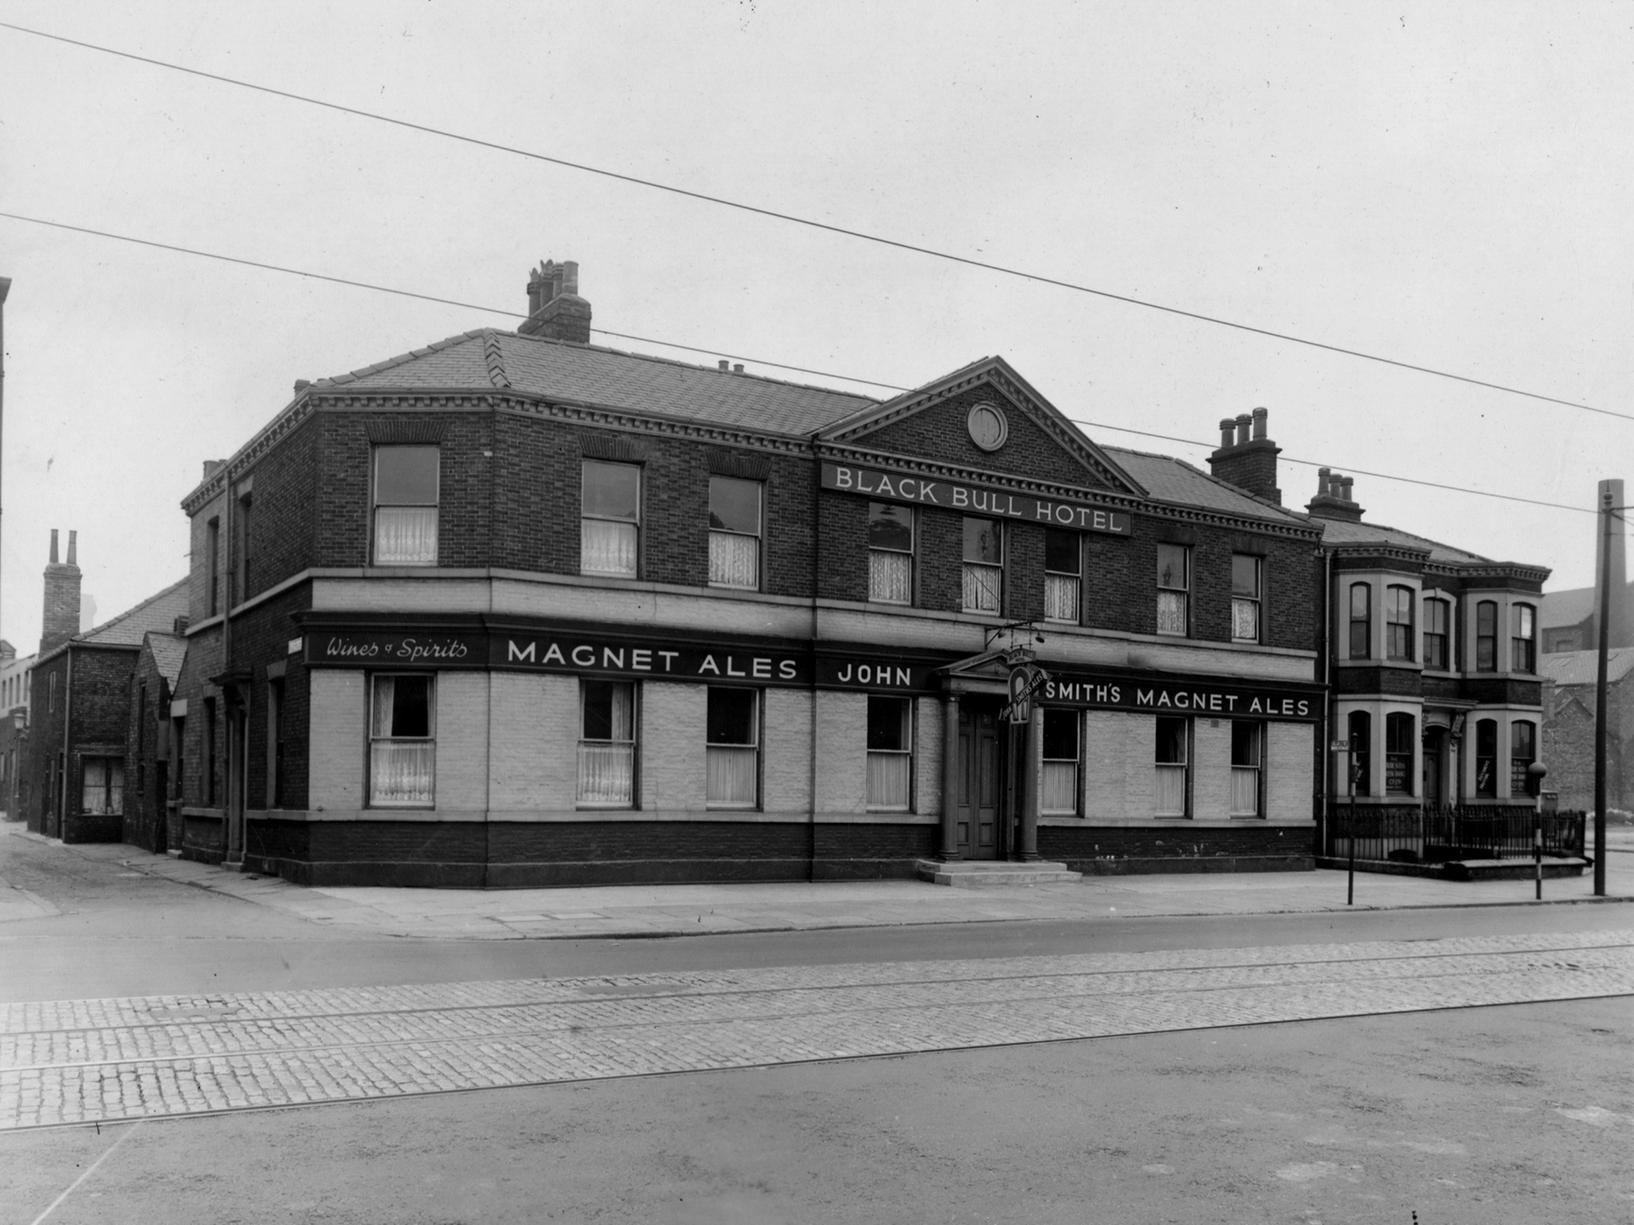 The Black Bull Hotel on Hunslet Road. The hotel is a Magnet and John Smiths brewery and has it written on the front of the building.